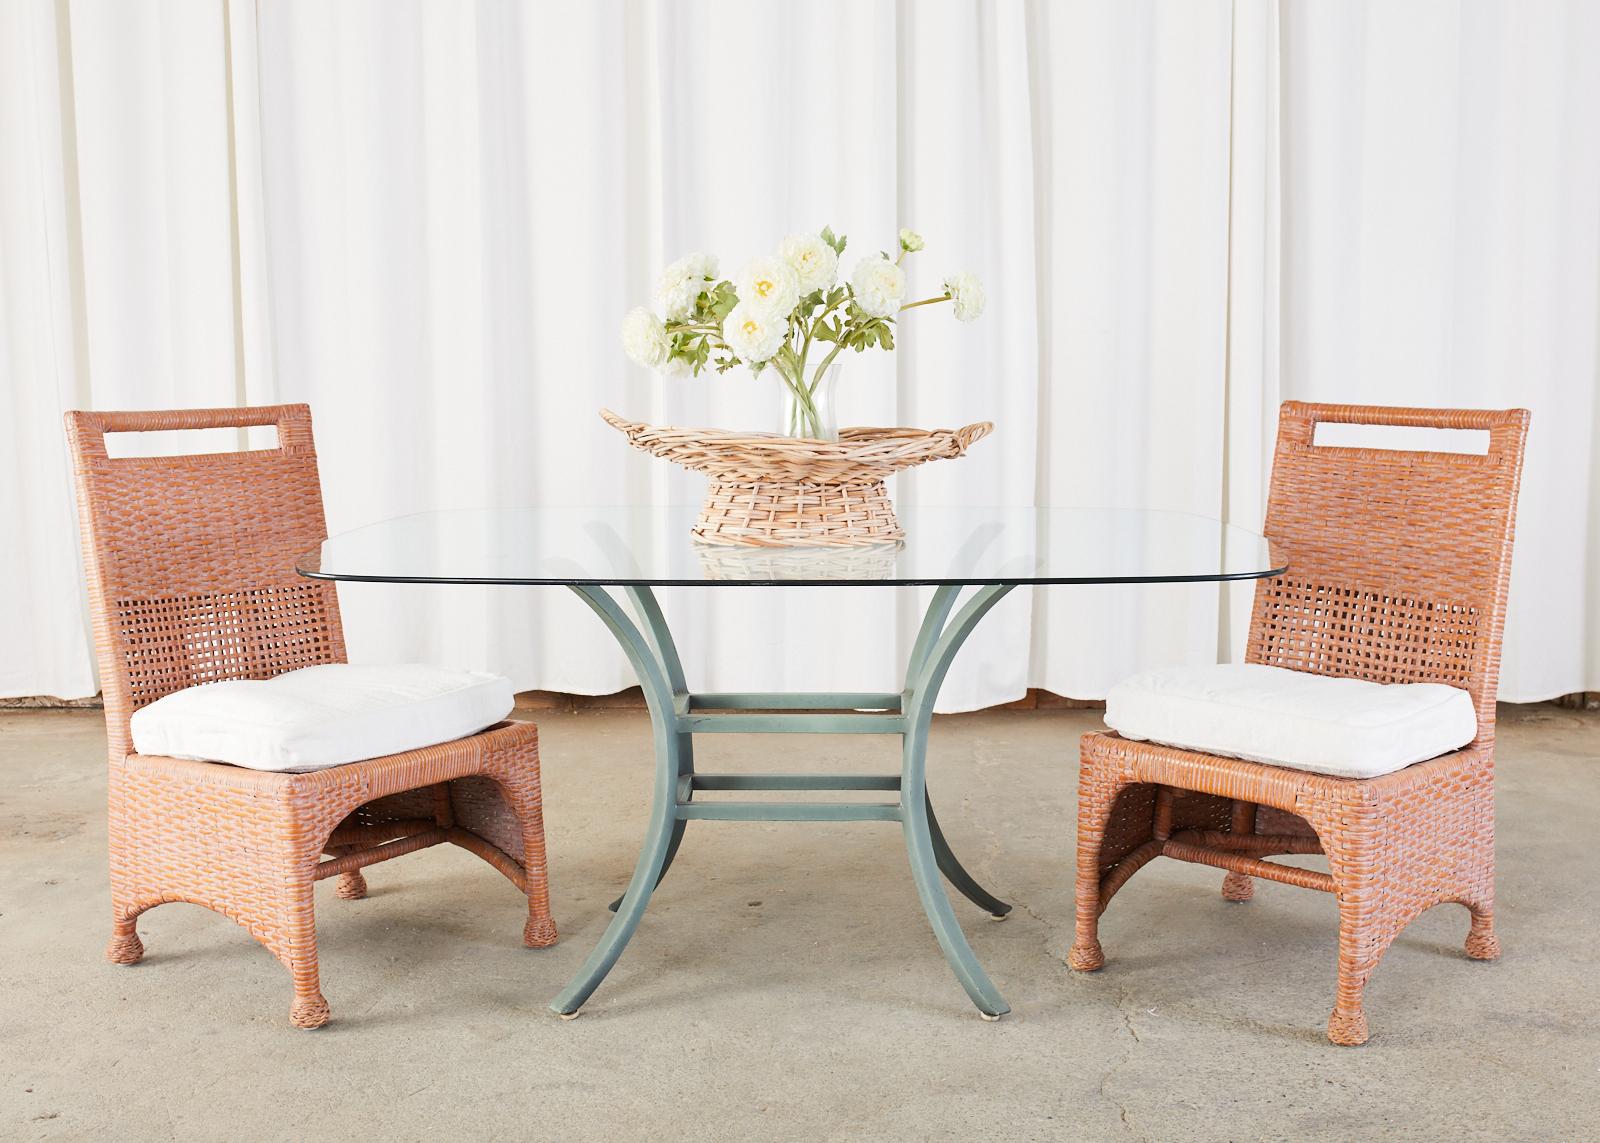 Oval glass garden or patio dining table featuring an aluminum base with a faux verdigris finish. Crafted from four gracefully curved legs conjoined in the middle with two stretchers. The table has a simple and elegant profile.